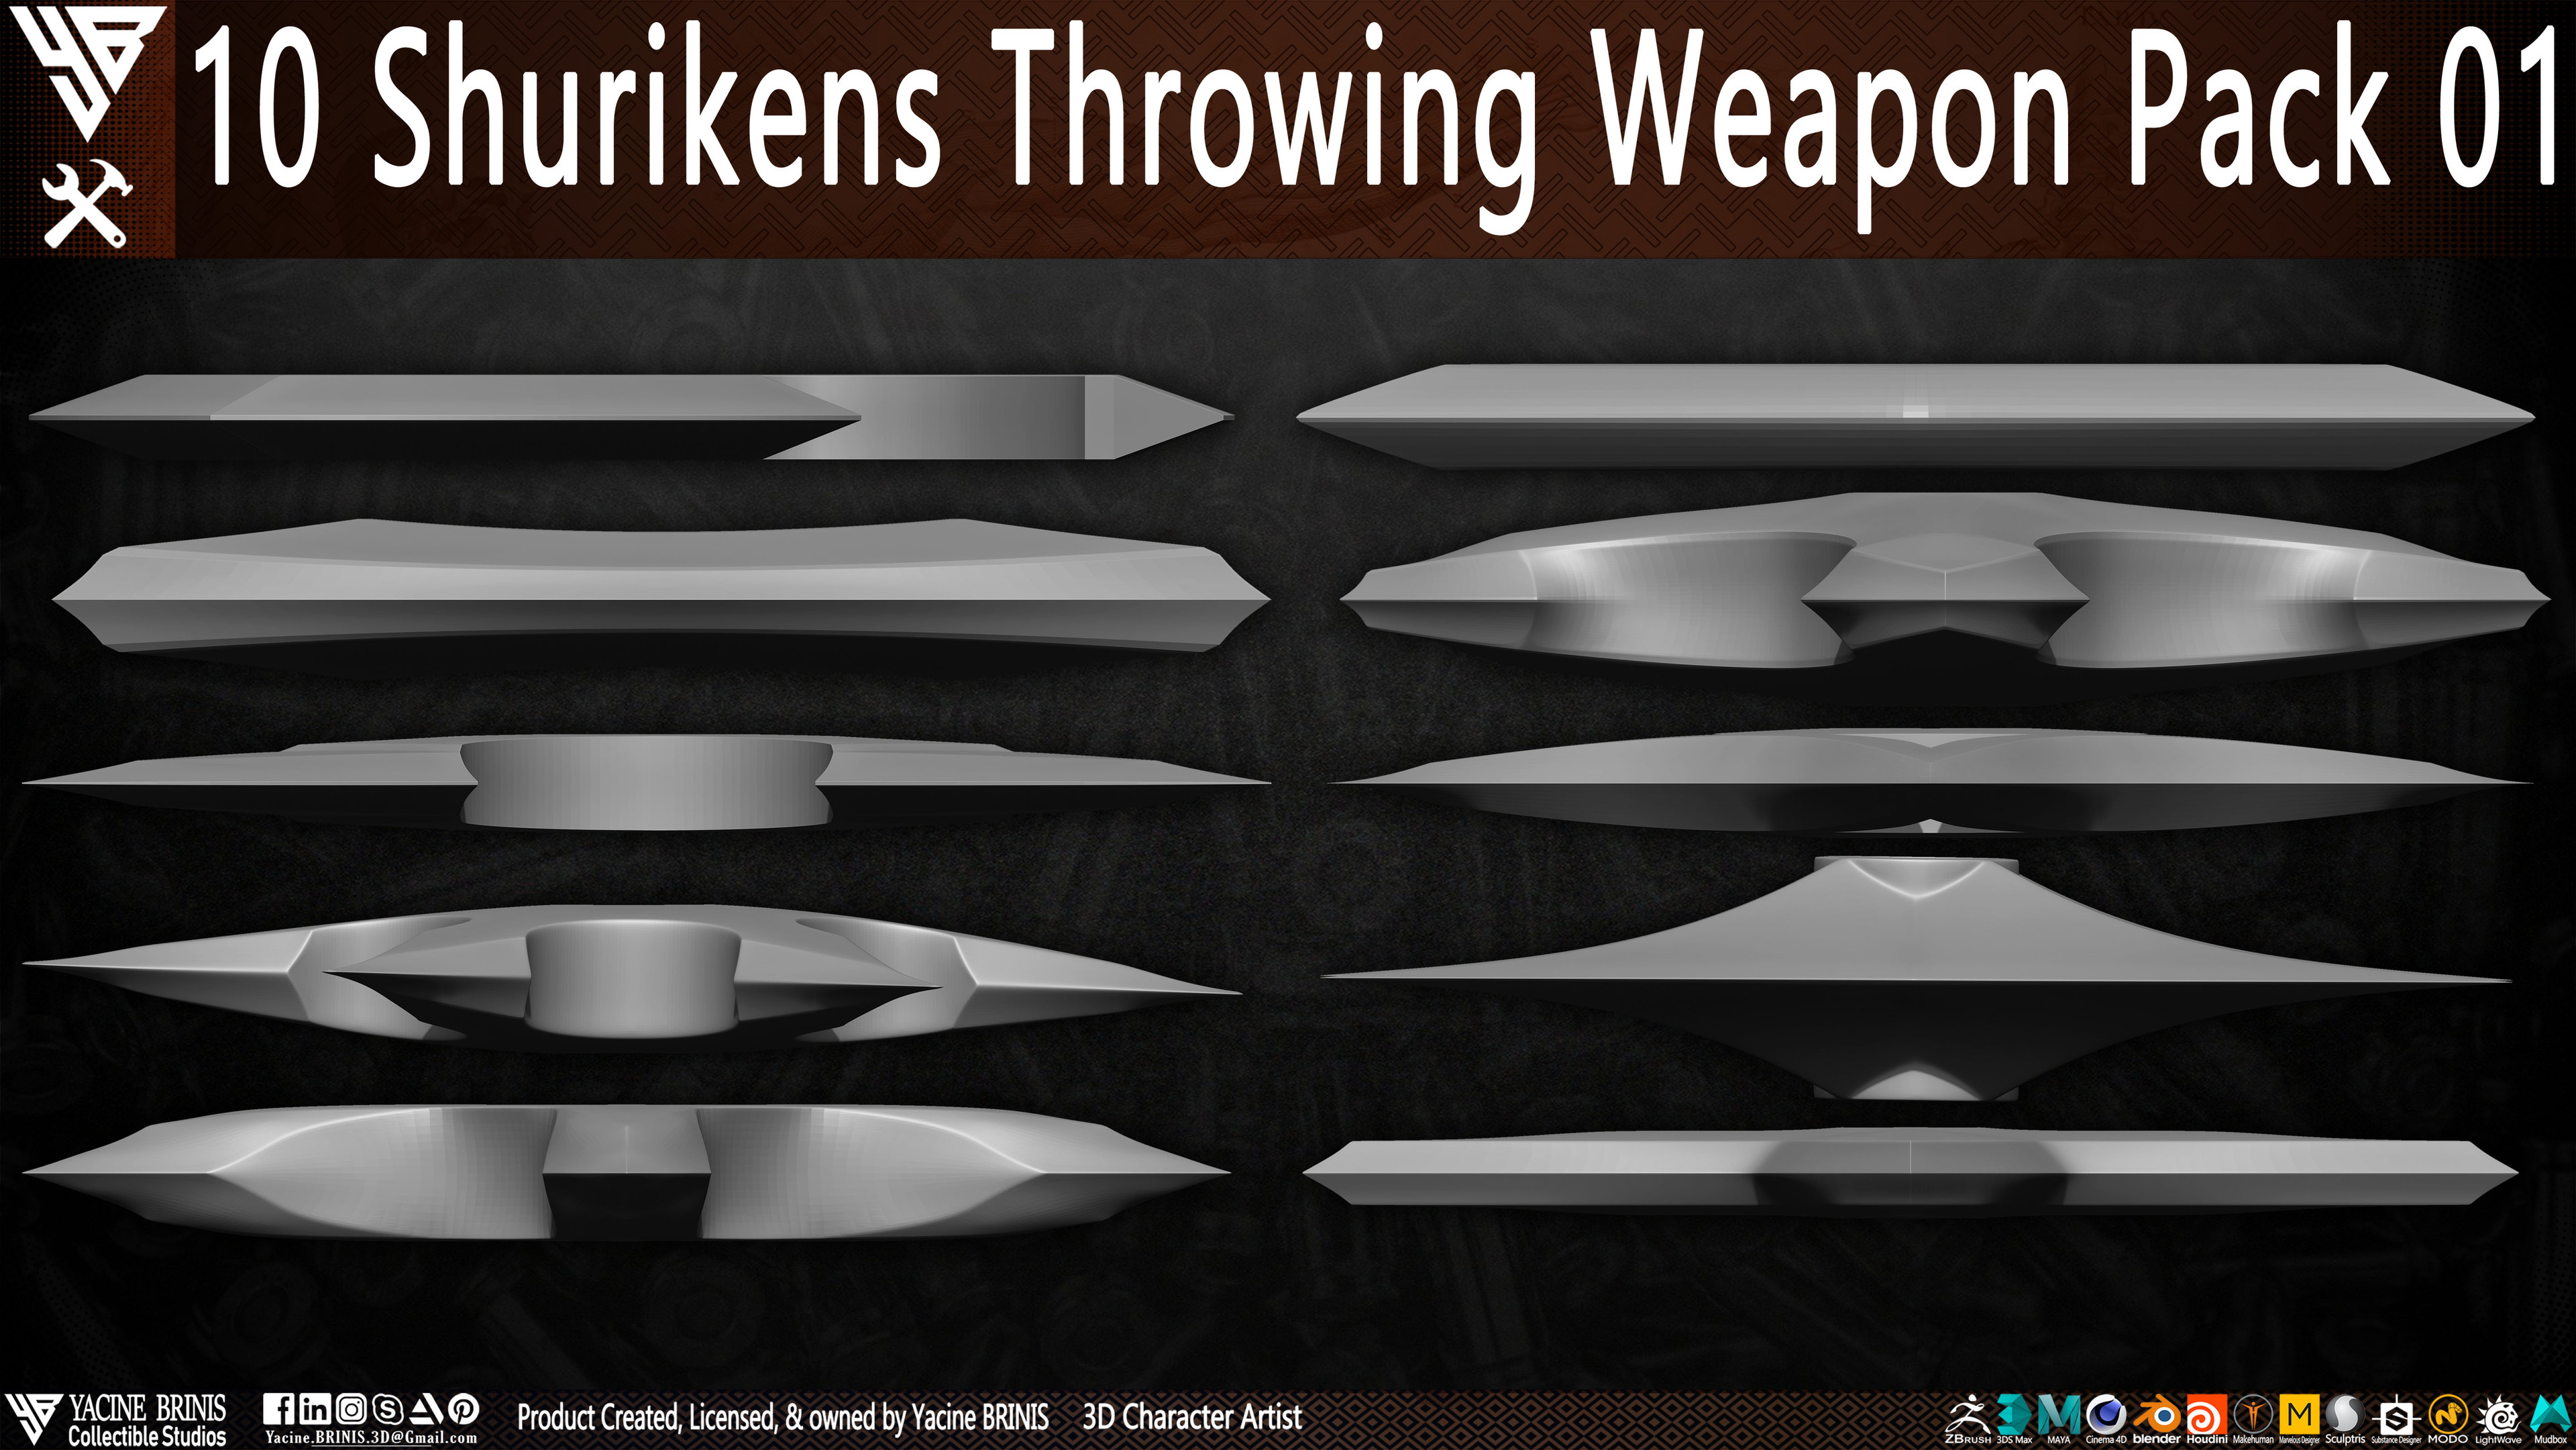 10 Shurikens Throwing Weapon Pack 01 sculpted by Yacine BRINIS Set 03